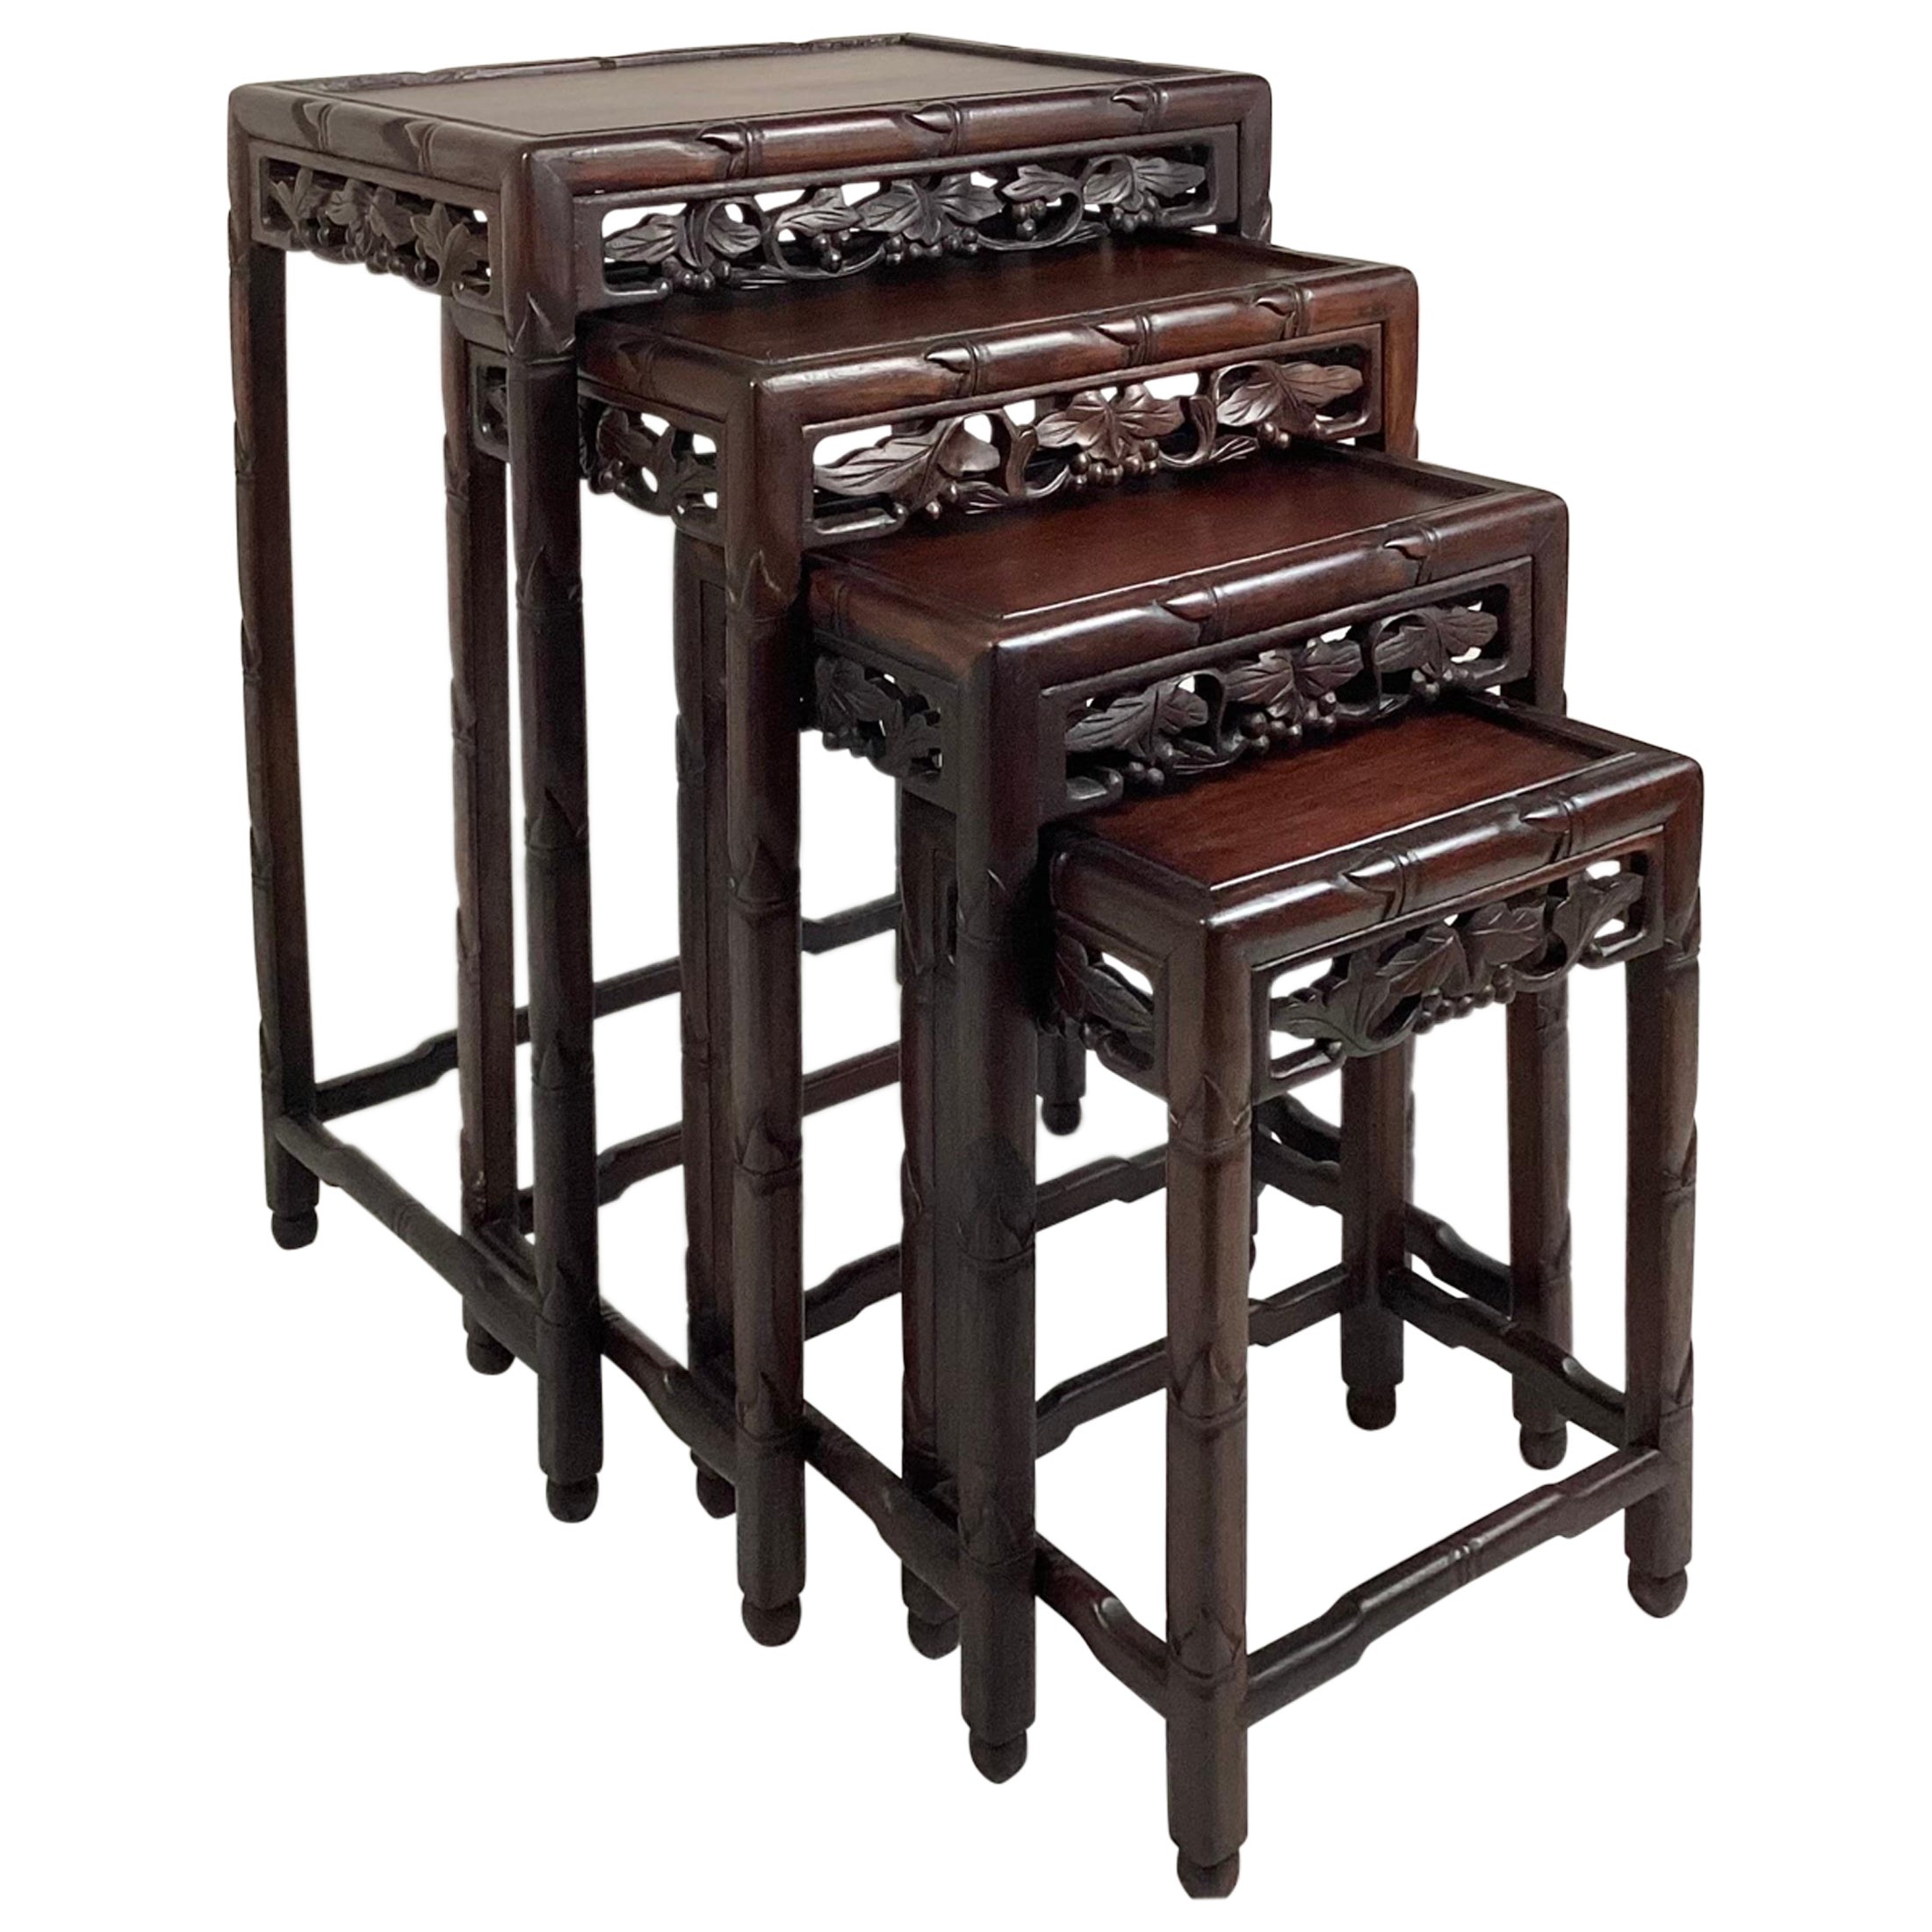 Chinese Rosewood Set of 4 Nesting Tables with Carved Frieze Decoration For Sale